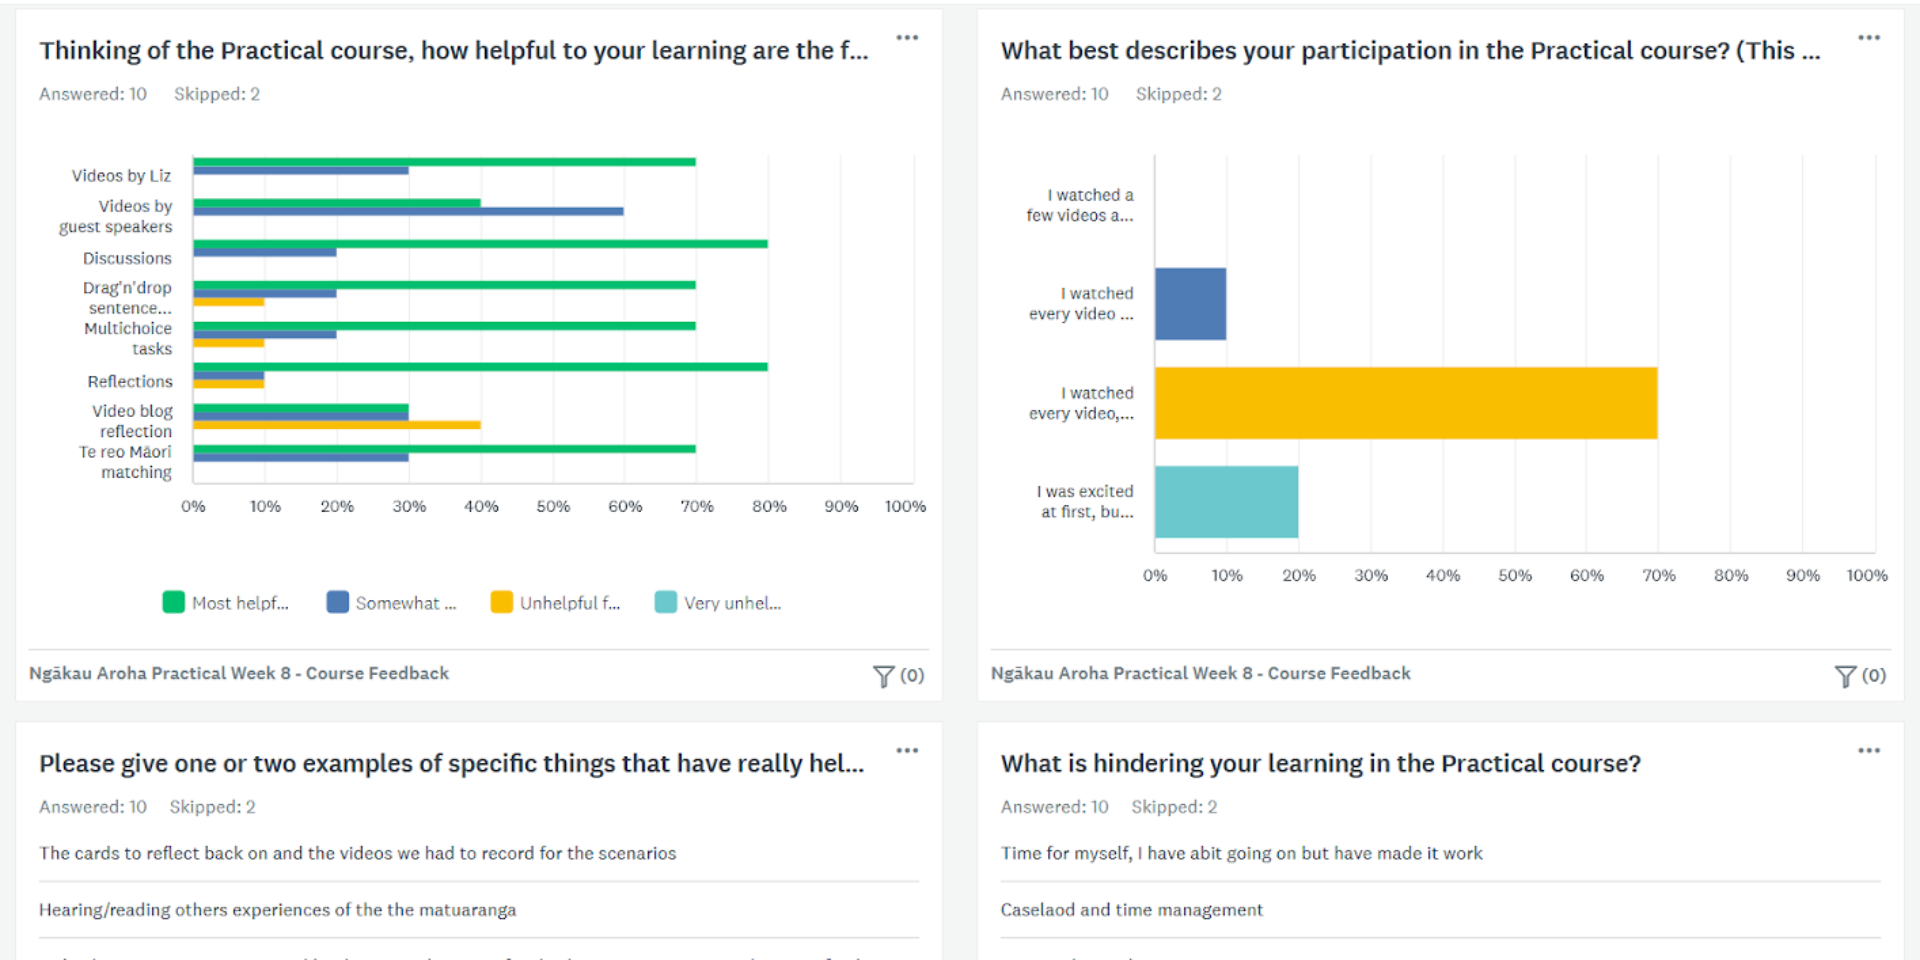 Ngākau Aroha Parenting survey results showing learners found the videos and reflections most helpful with videos, drag and drop, multiple choice and matching tasks close behind.